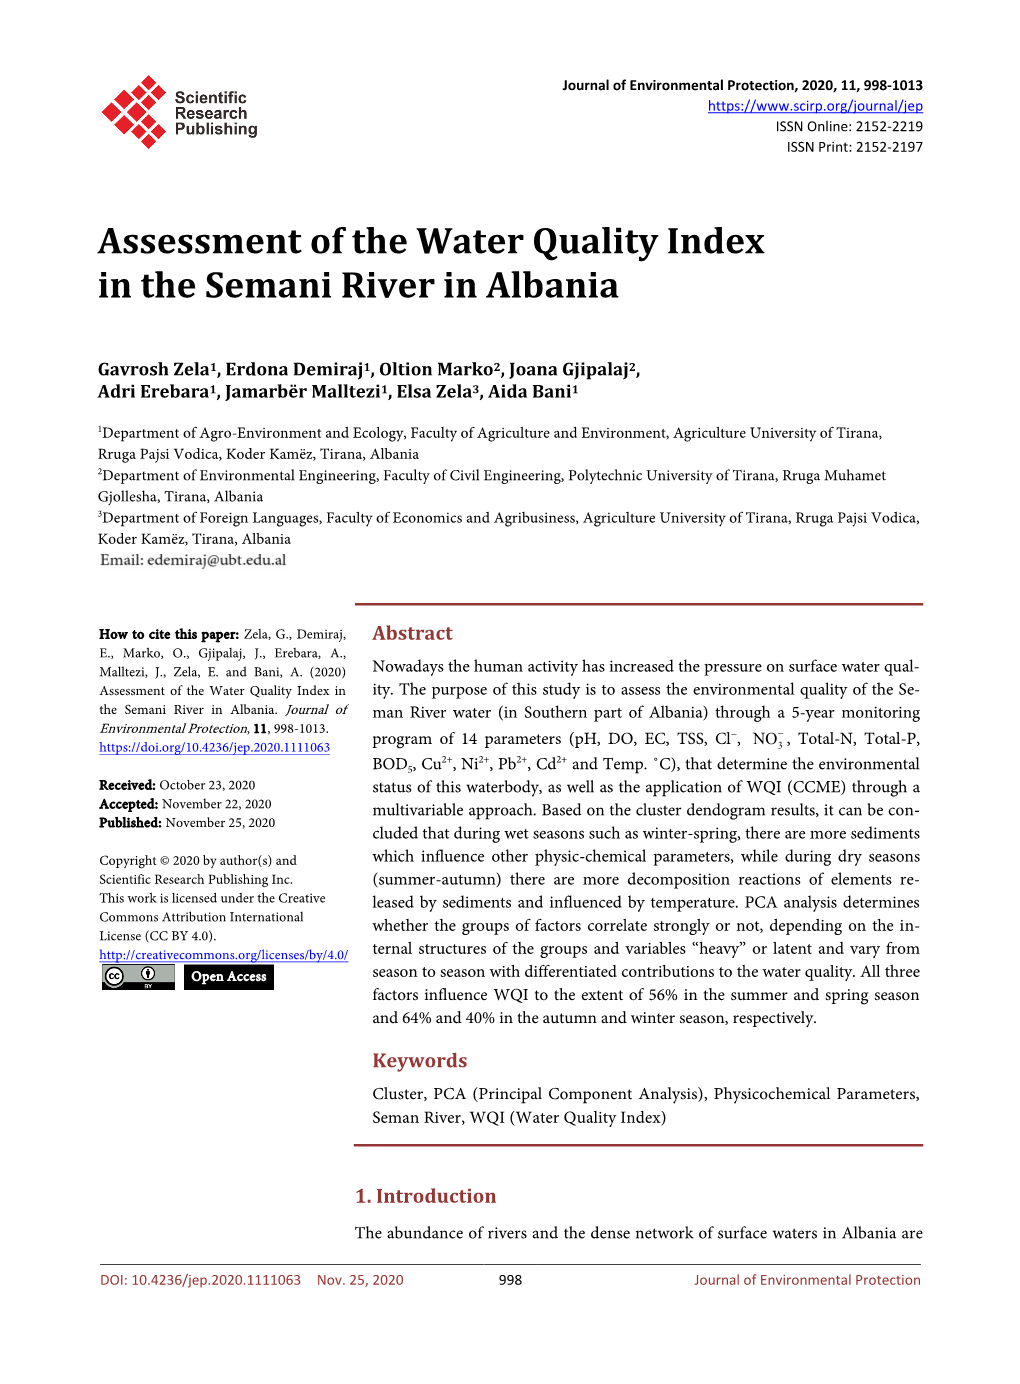 Assessment of the Water Quality Index in the Semani River in Albania